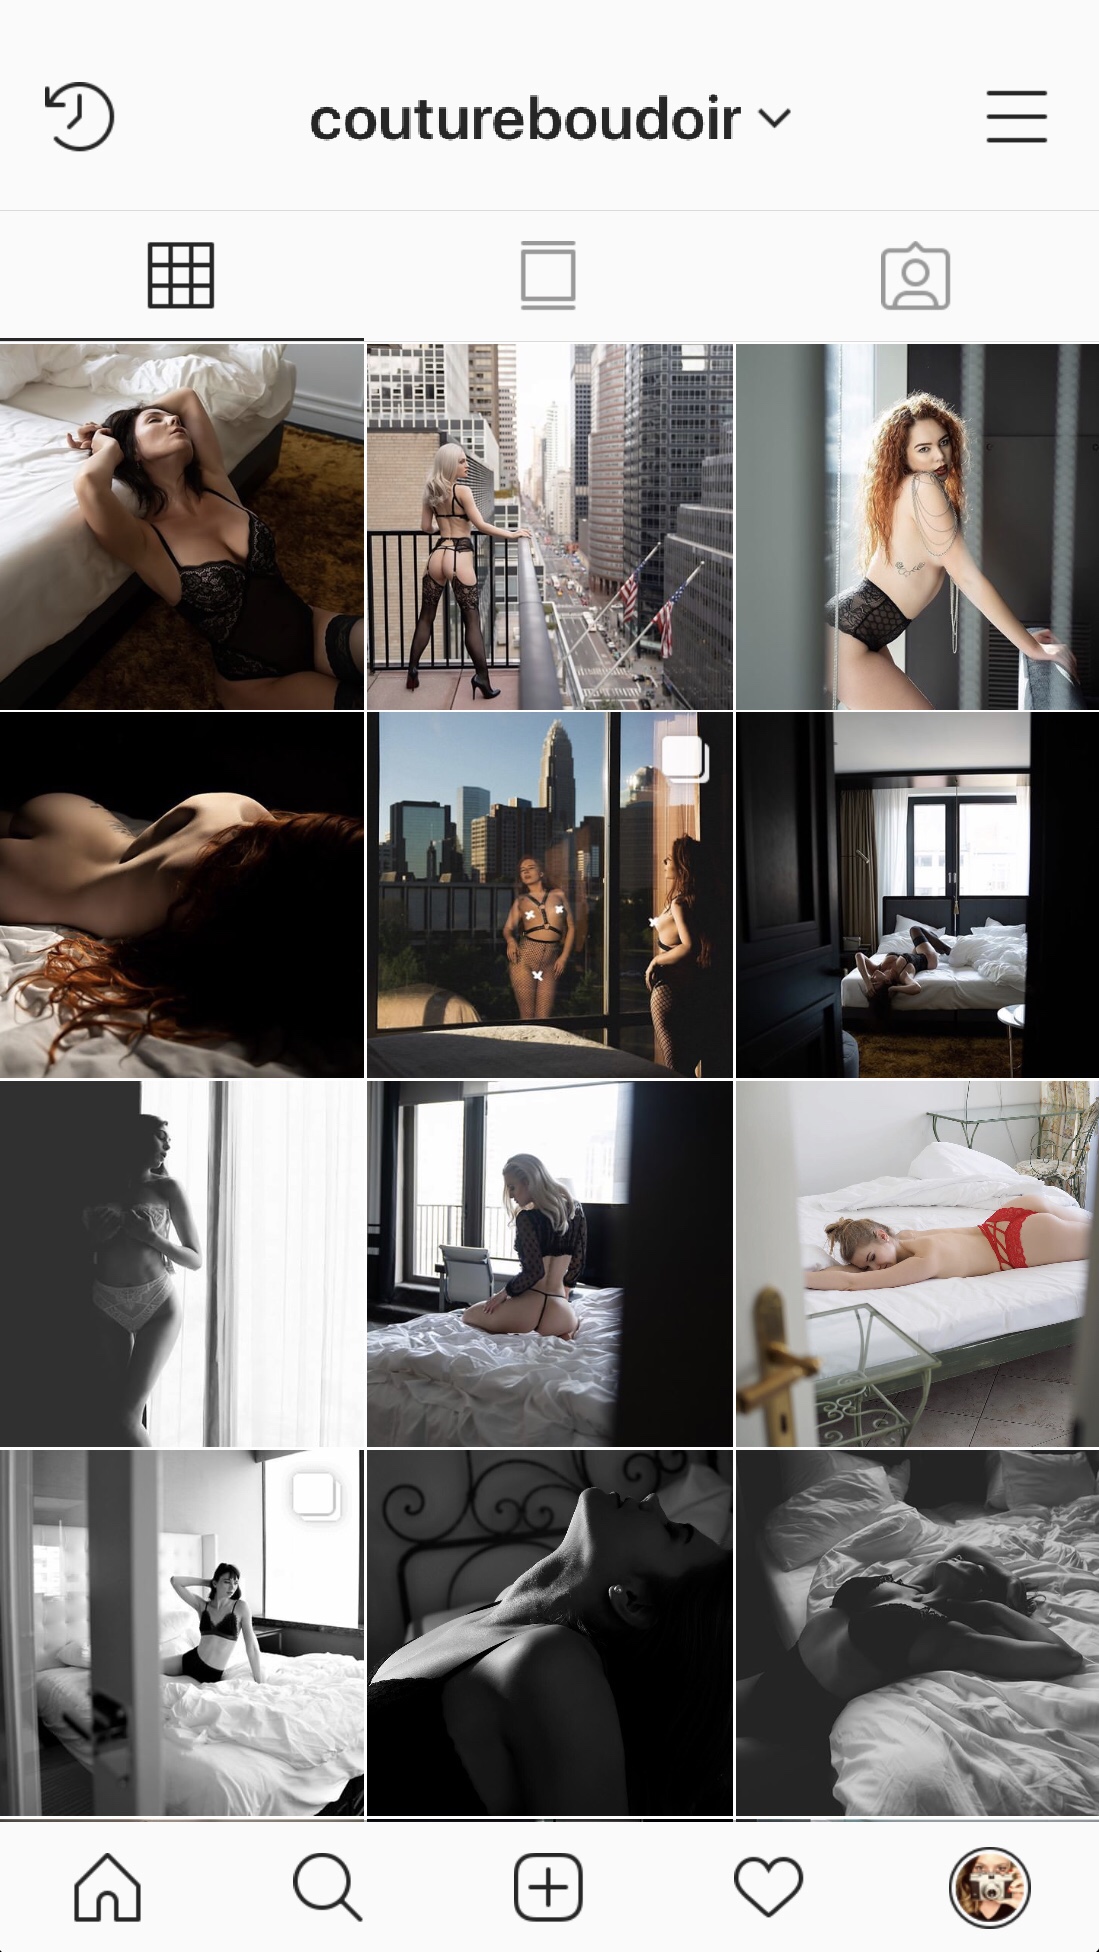 Instagram tips and tricks for photographers